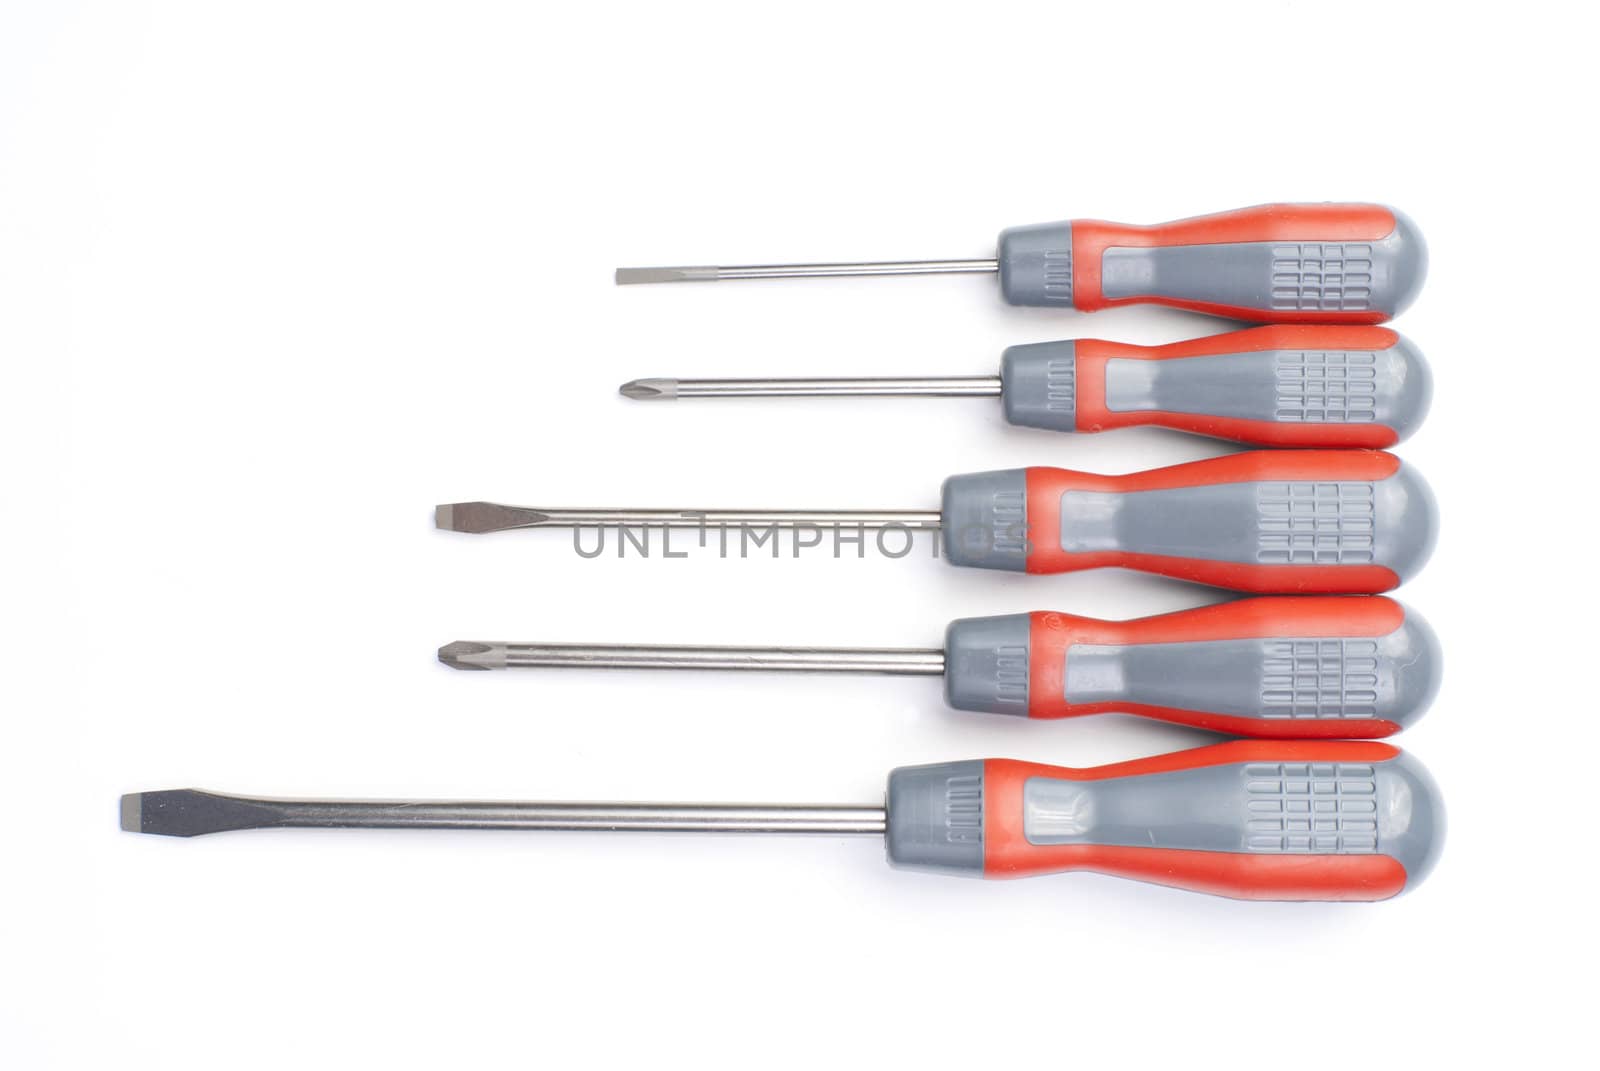 five screwdrivers isotaled on white background